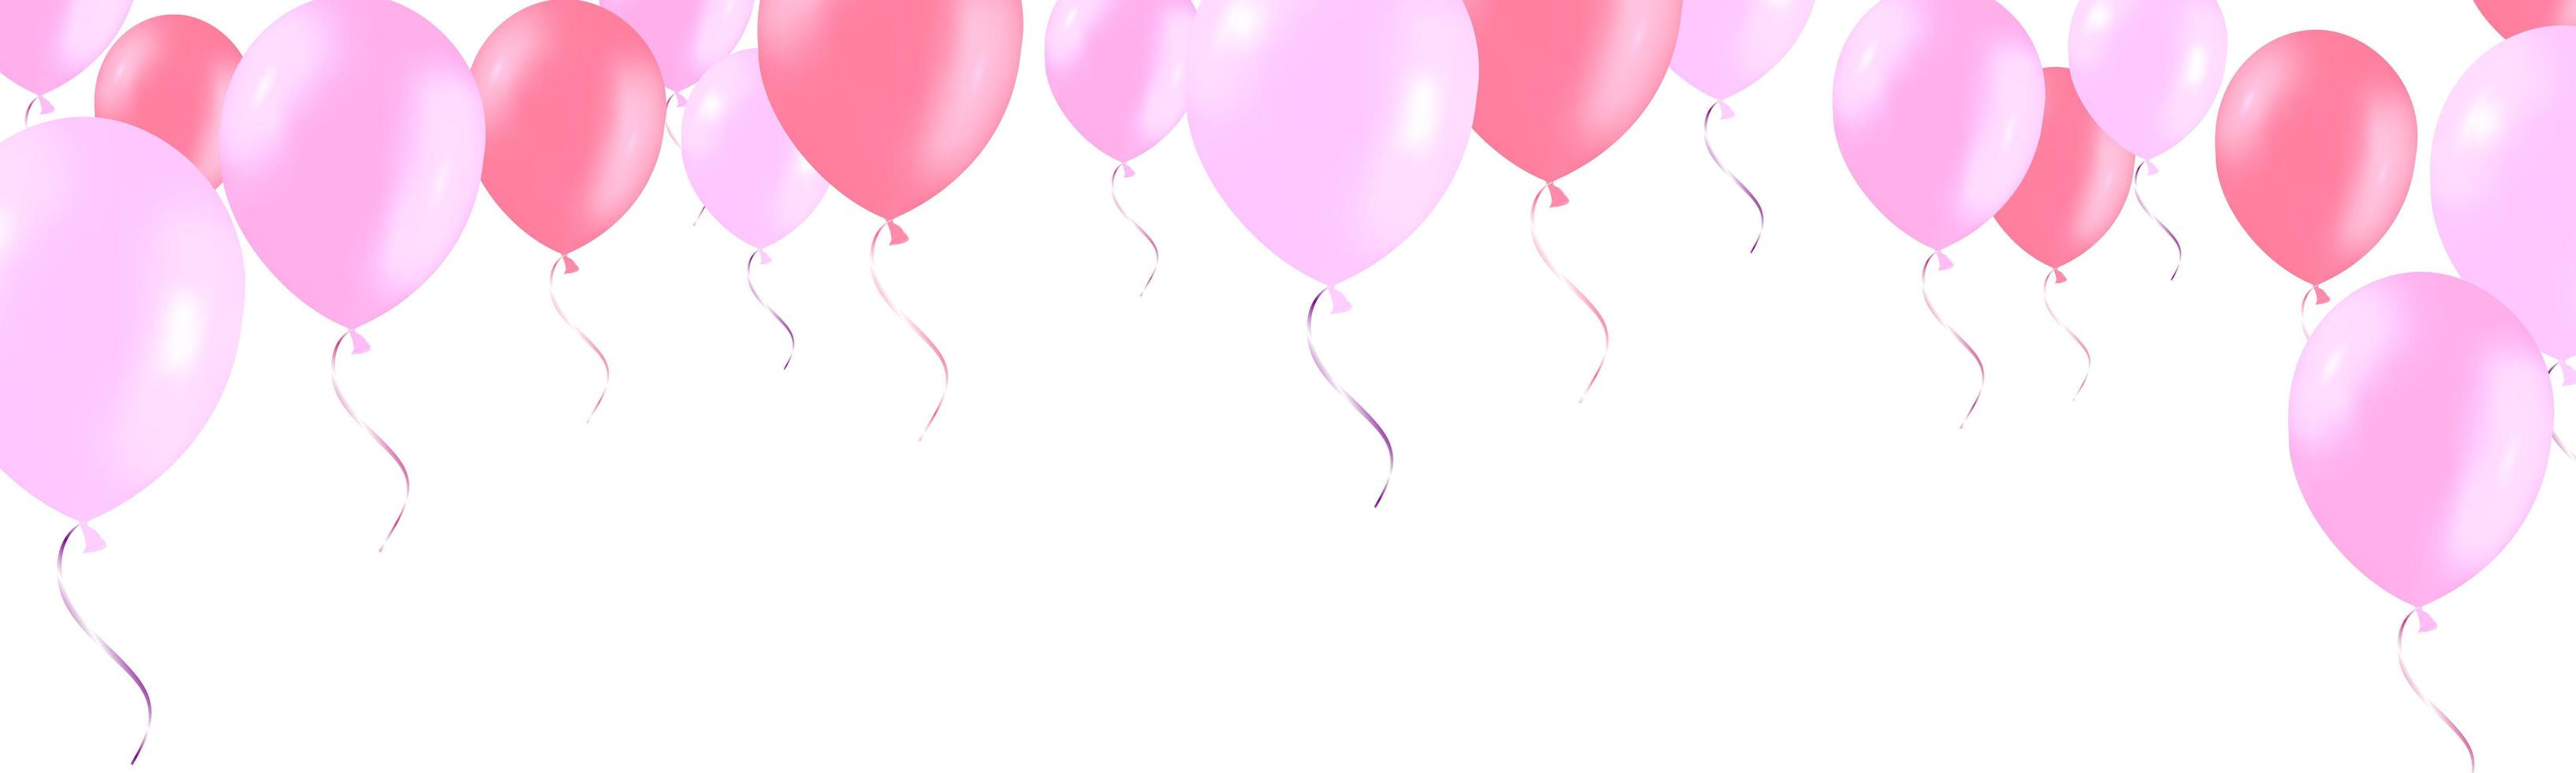 horizontal banner with pink rose helium balloons vector